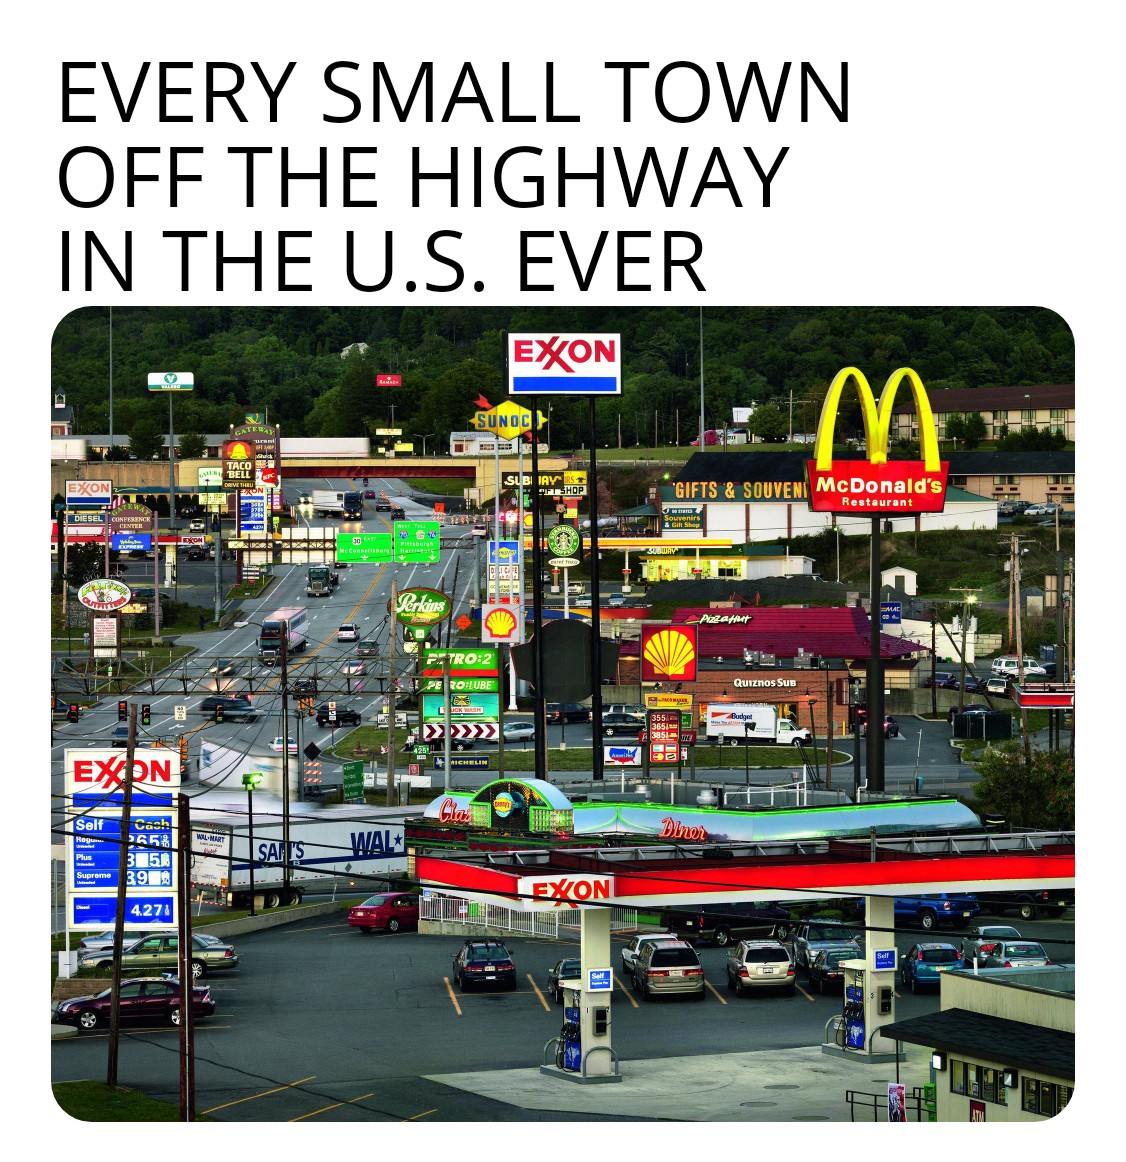 every small town off the highway - Every Small Town Off The Highway In The U.S. Ever Exxon Gifts & Souveni McDonald's Exon